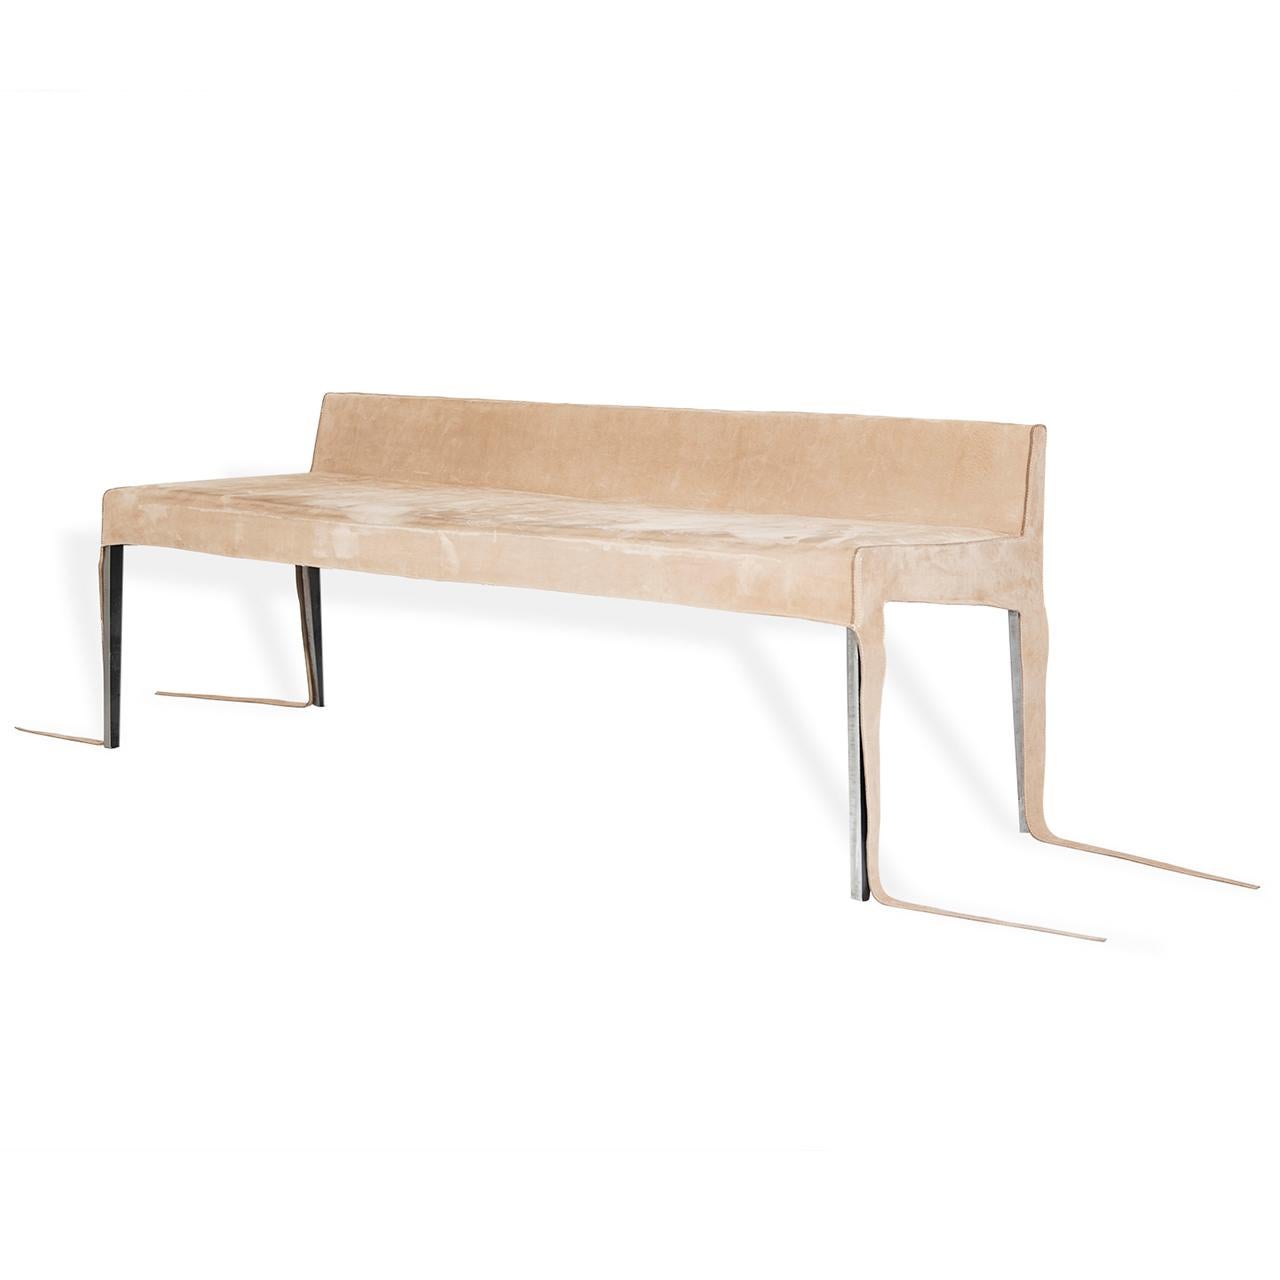 A sleek design bench with a wood and soldered steel frame with suede cover. Intended for interior use and perfect for a reception or gallery area. COM fabric and bespoke measurements available.